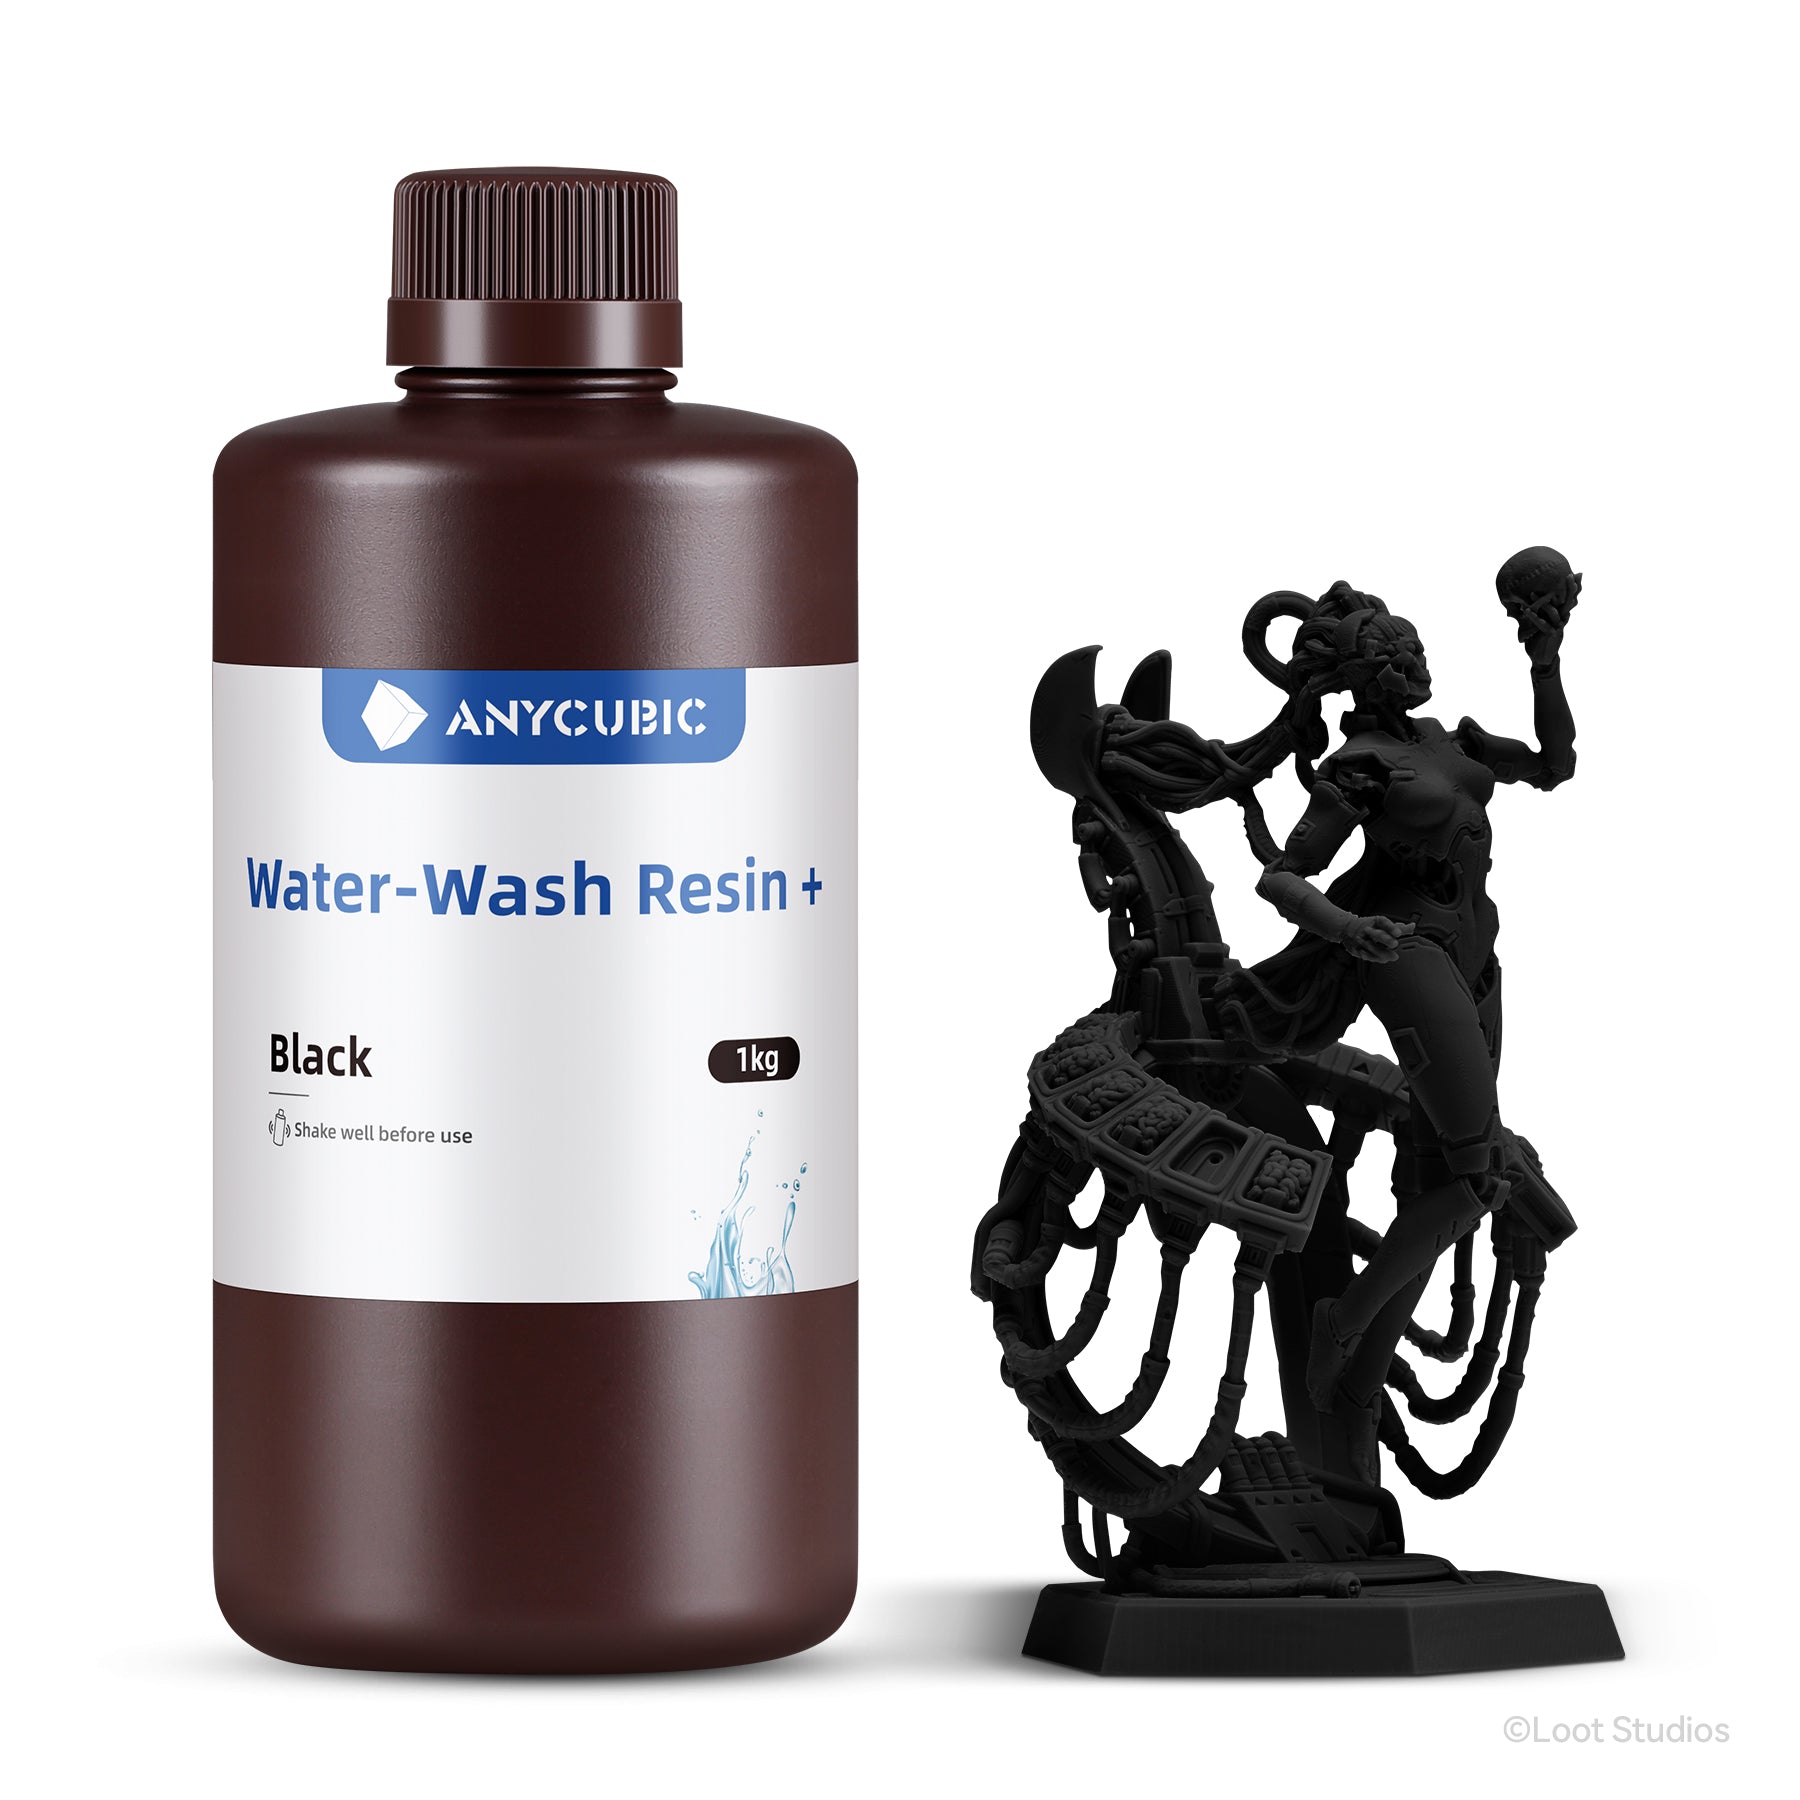 Anycubic Water-Wash Resin+: Eco-friendly Water-washable resins for LCD/ SLA  3D Printing – ANYCUBIC-US